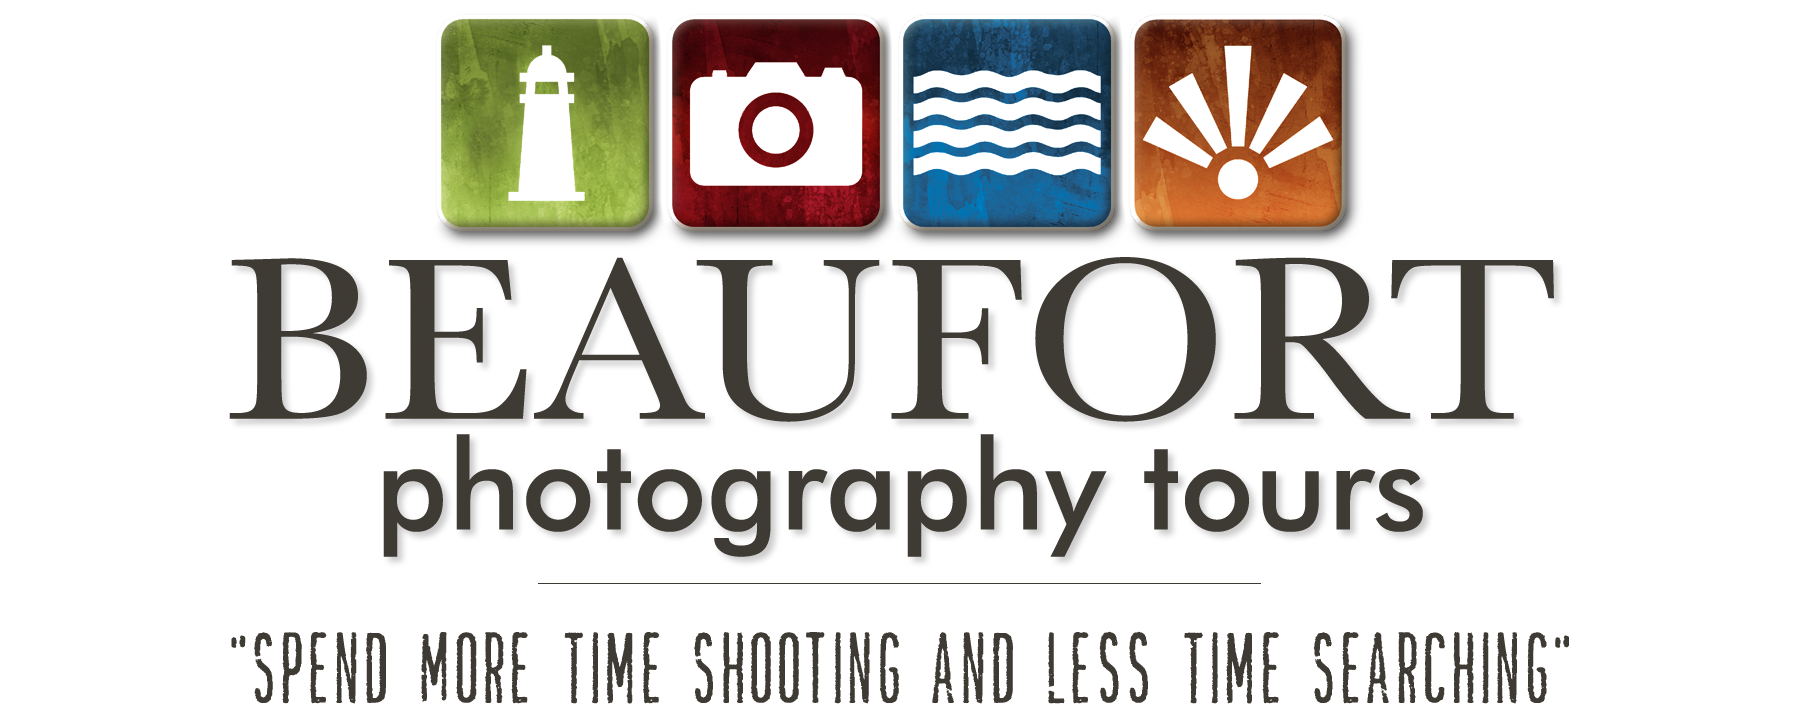 Beaufort Photography Tours